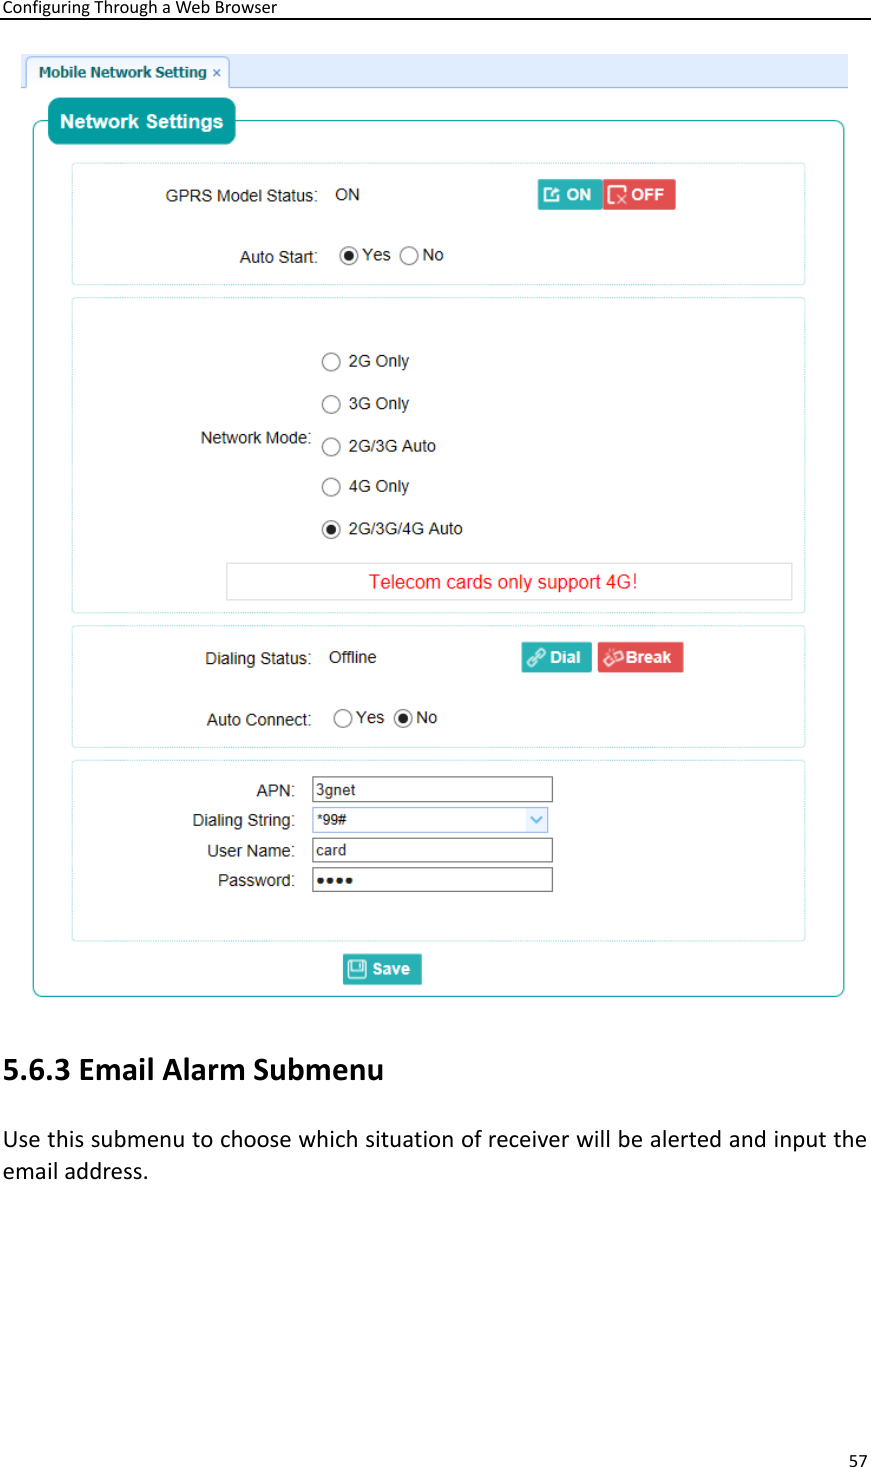 Configuring Through a Web Browser 57   5.6.3 Email Alarm Submenu Use this submenu to choose which situation of receiver will be alerted and input the email address. 